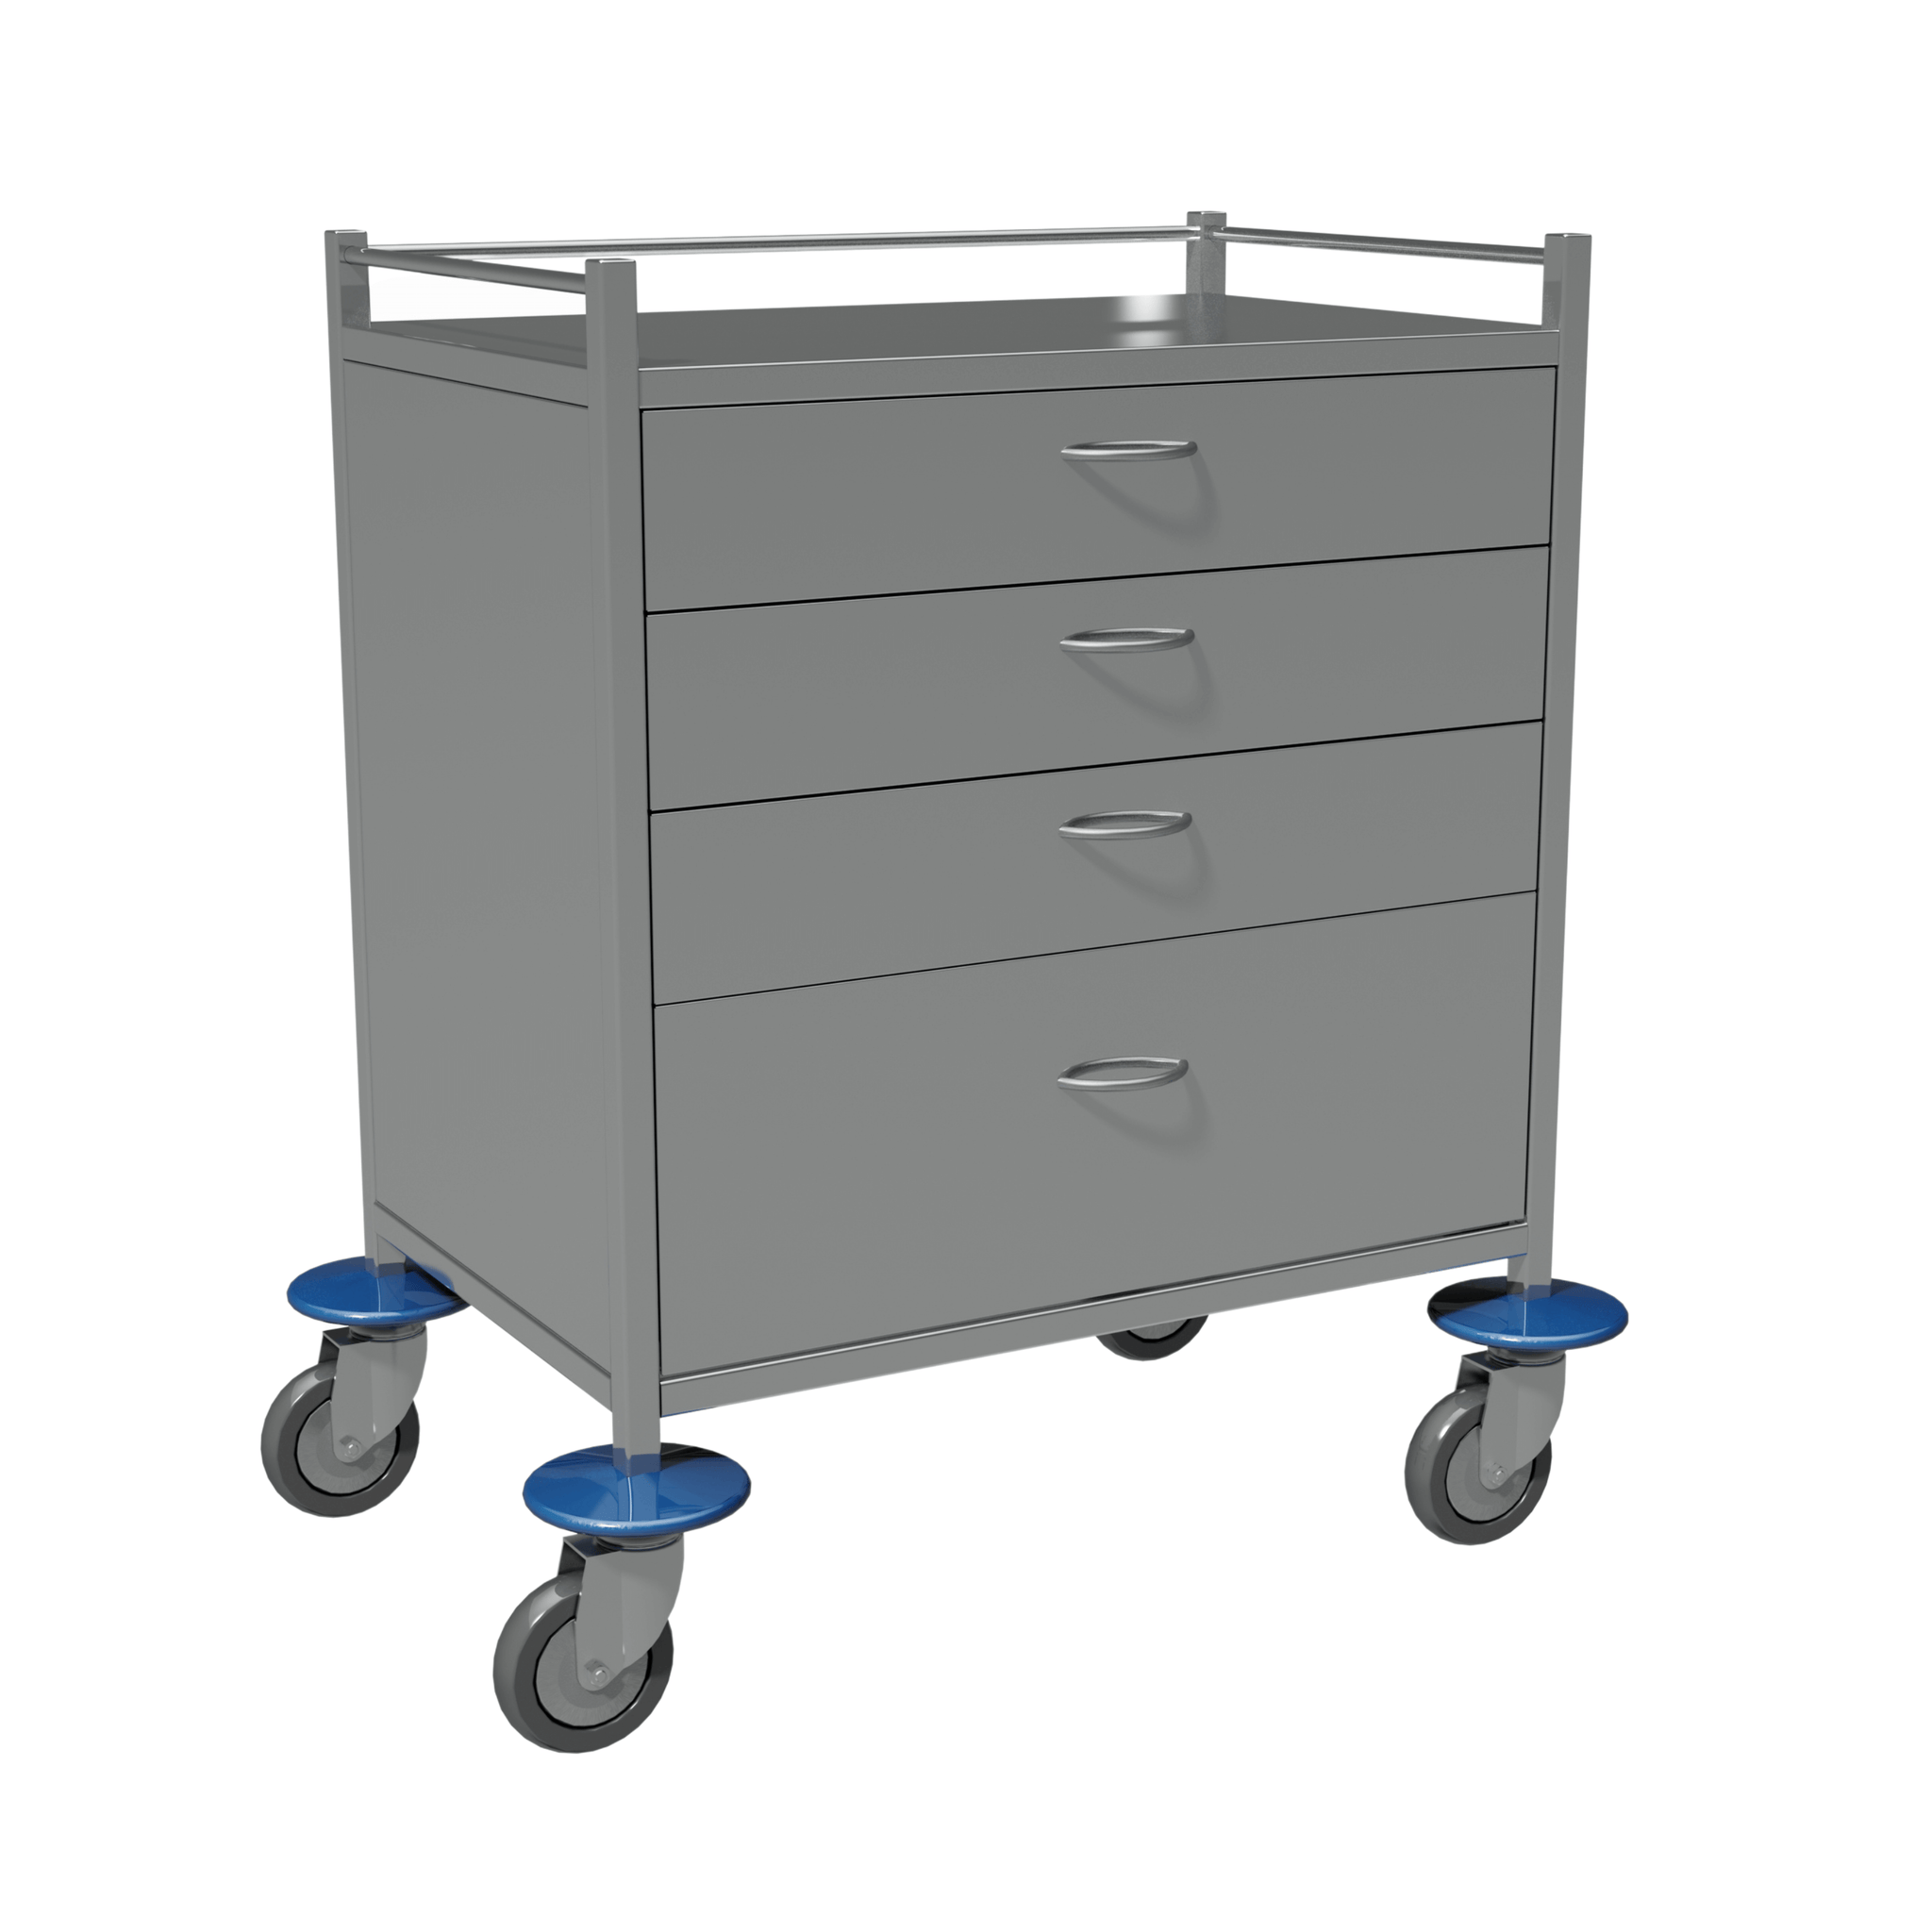 Anaesthetic Trolley - 5 Drawer, 600 X 490 X 900 mm